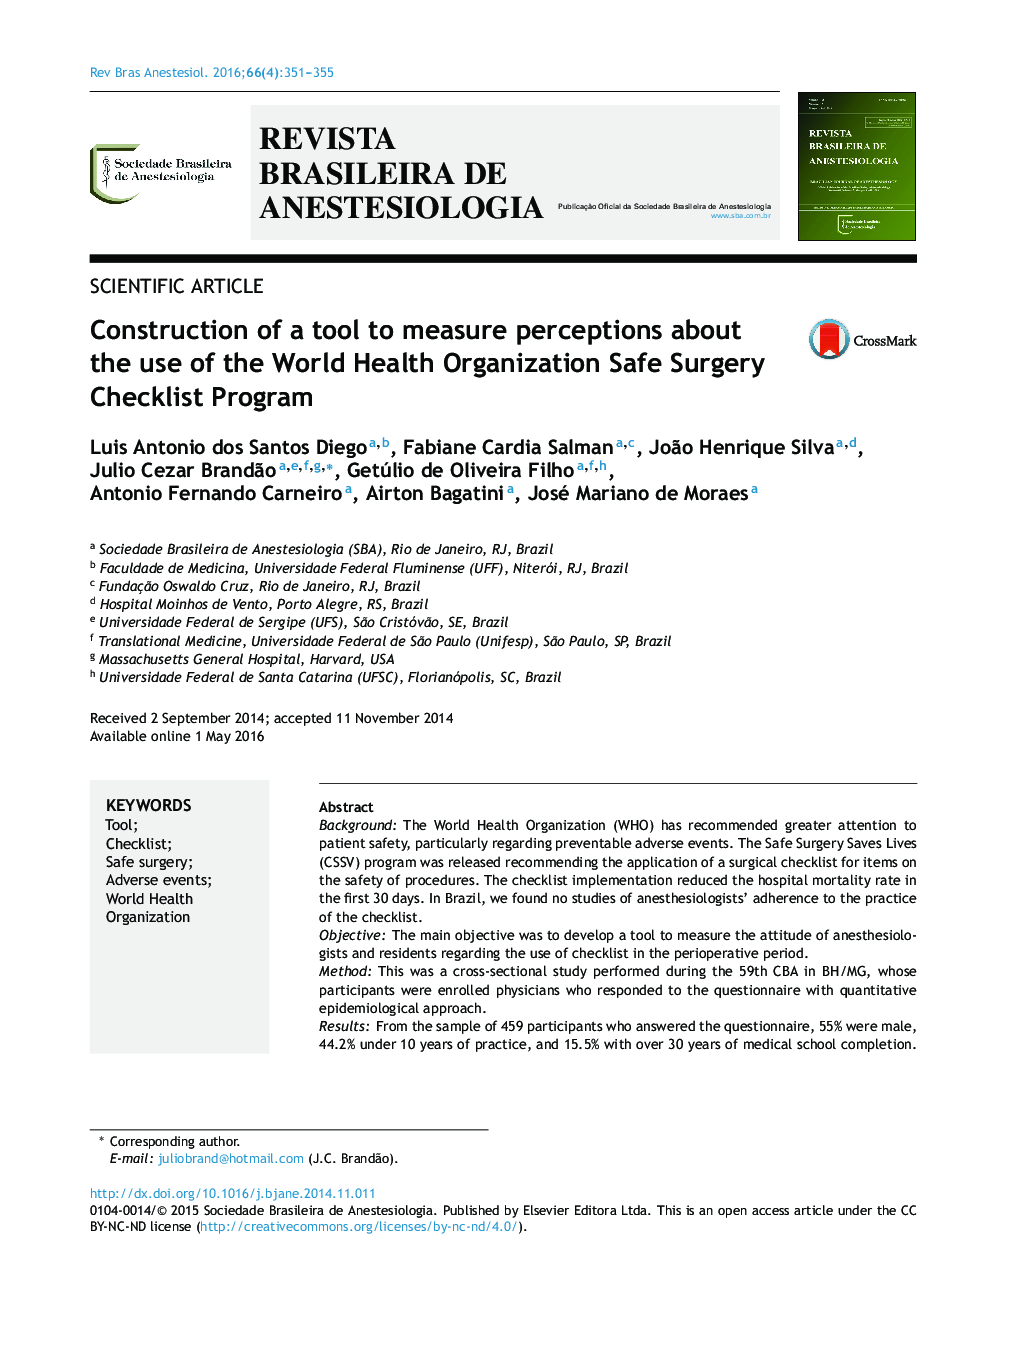 Construction of a tool to measure perceptions about the use of the World Health Organization Safe Surgery Checklist Program